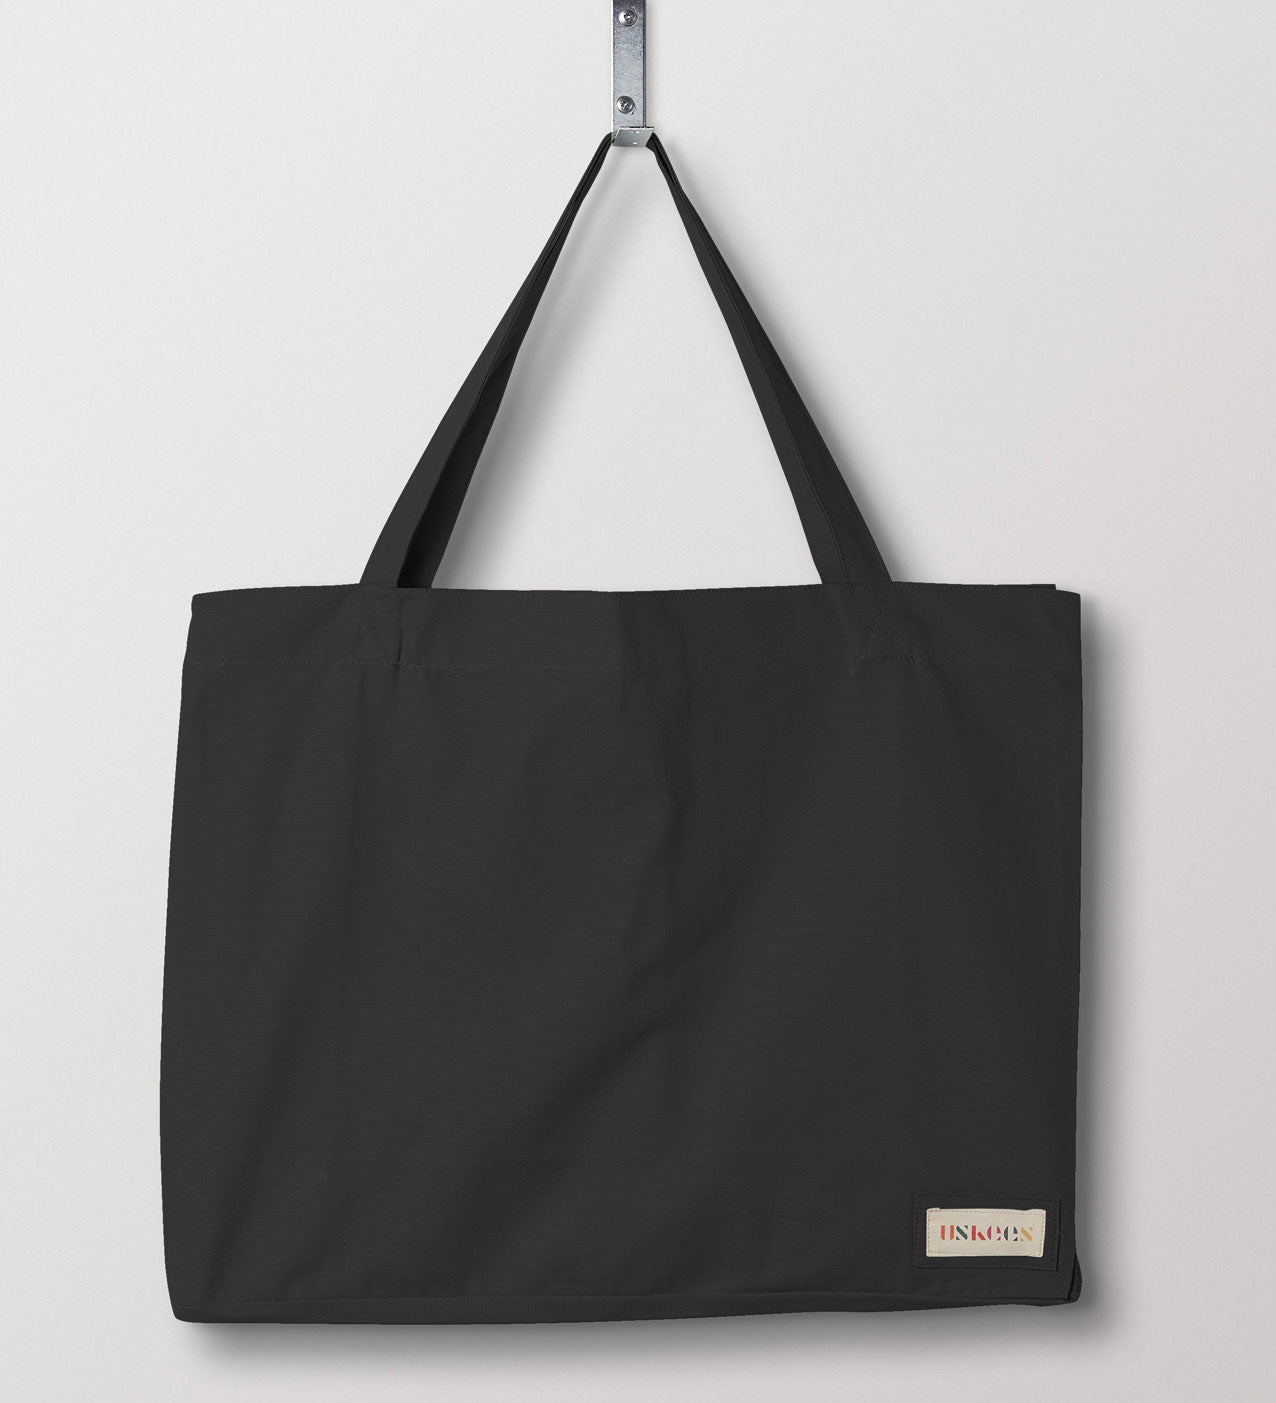 Full front hanging shot of Uskees #4001 large charcoal tote bag, showing double handles and Uskees woven logo.